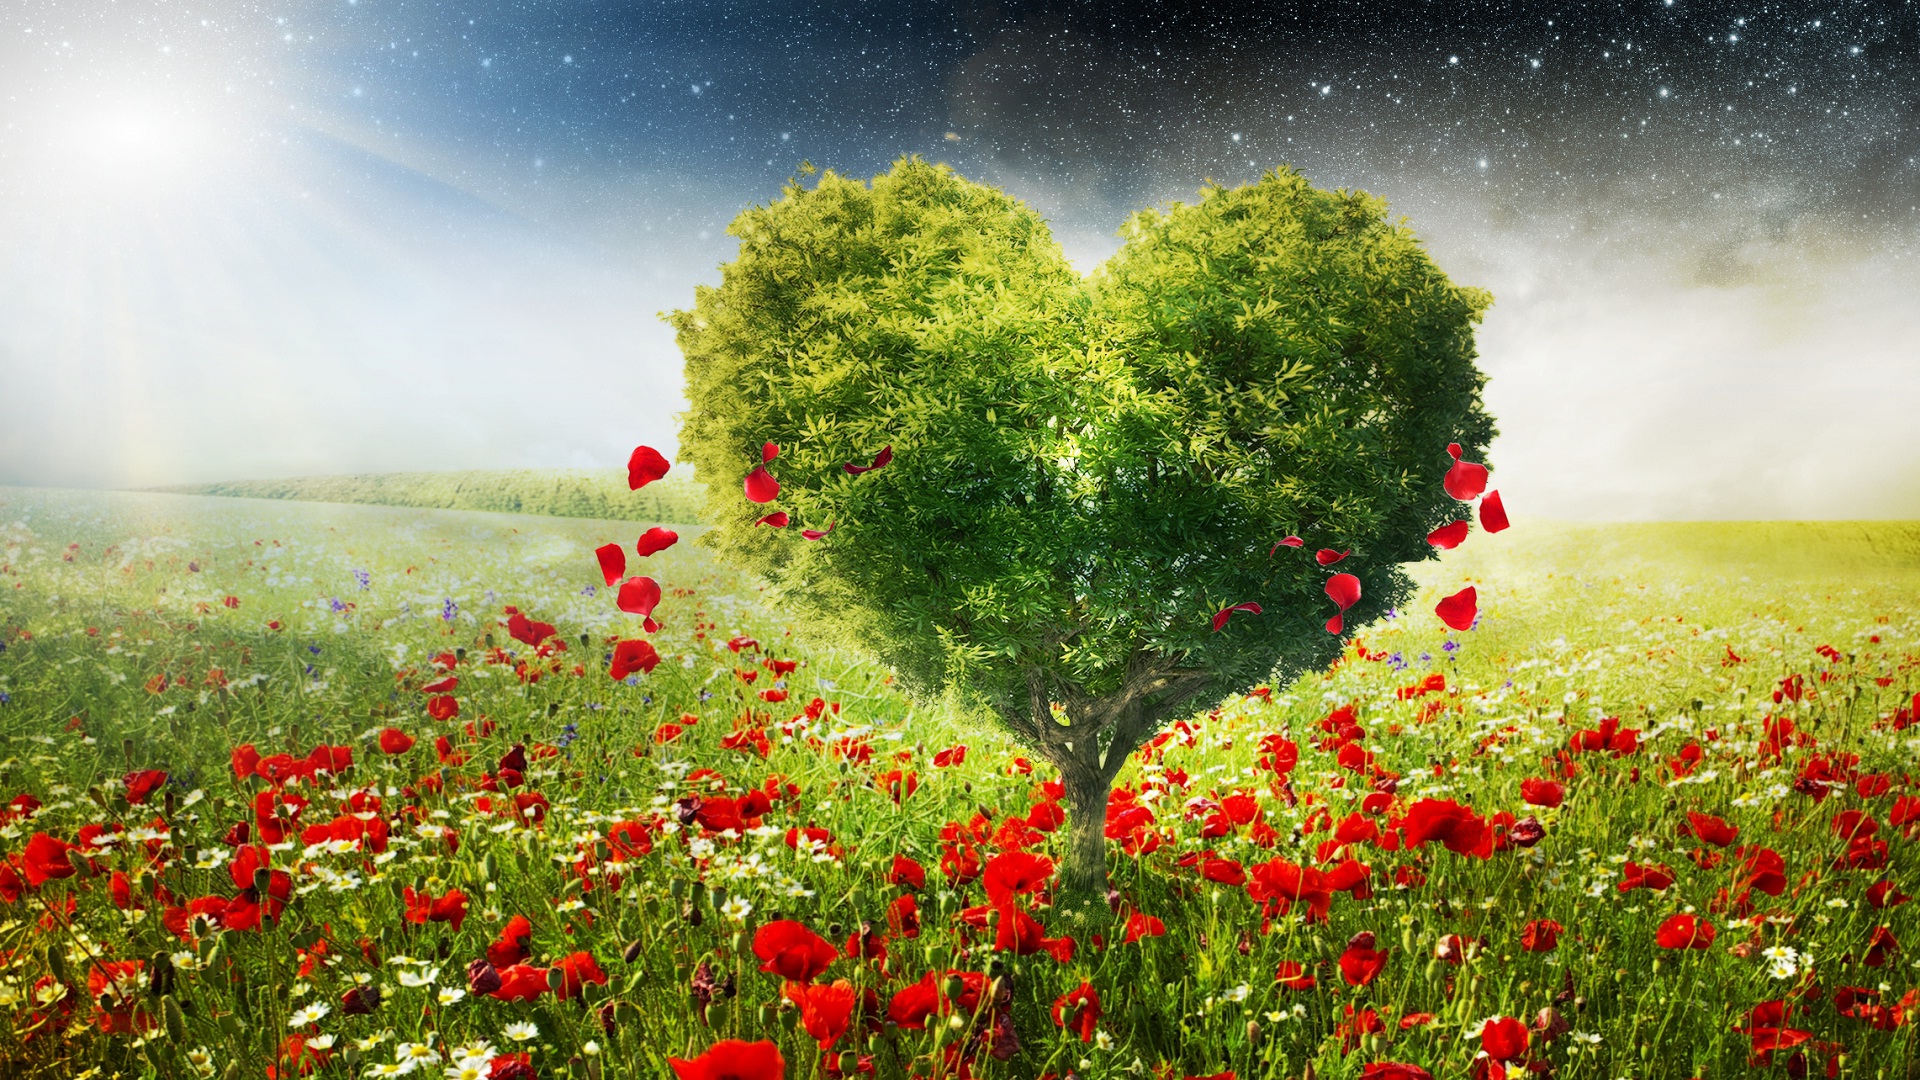 Tree Lovers Wallpapers High Quality | Download Free